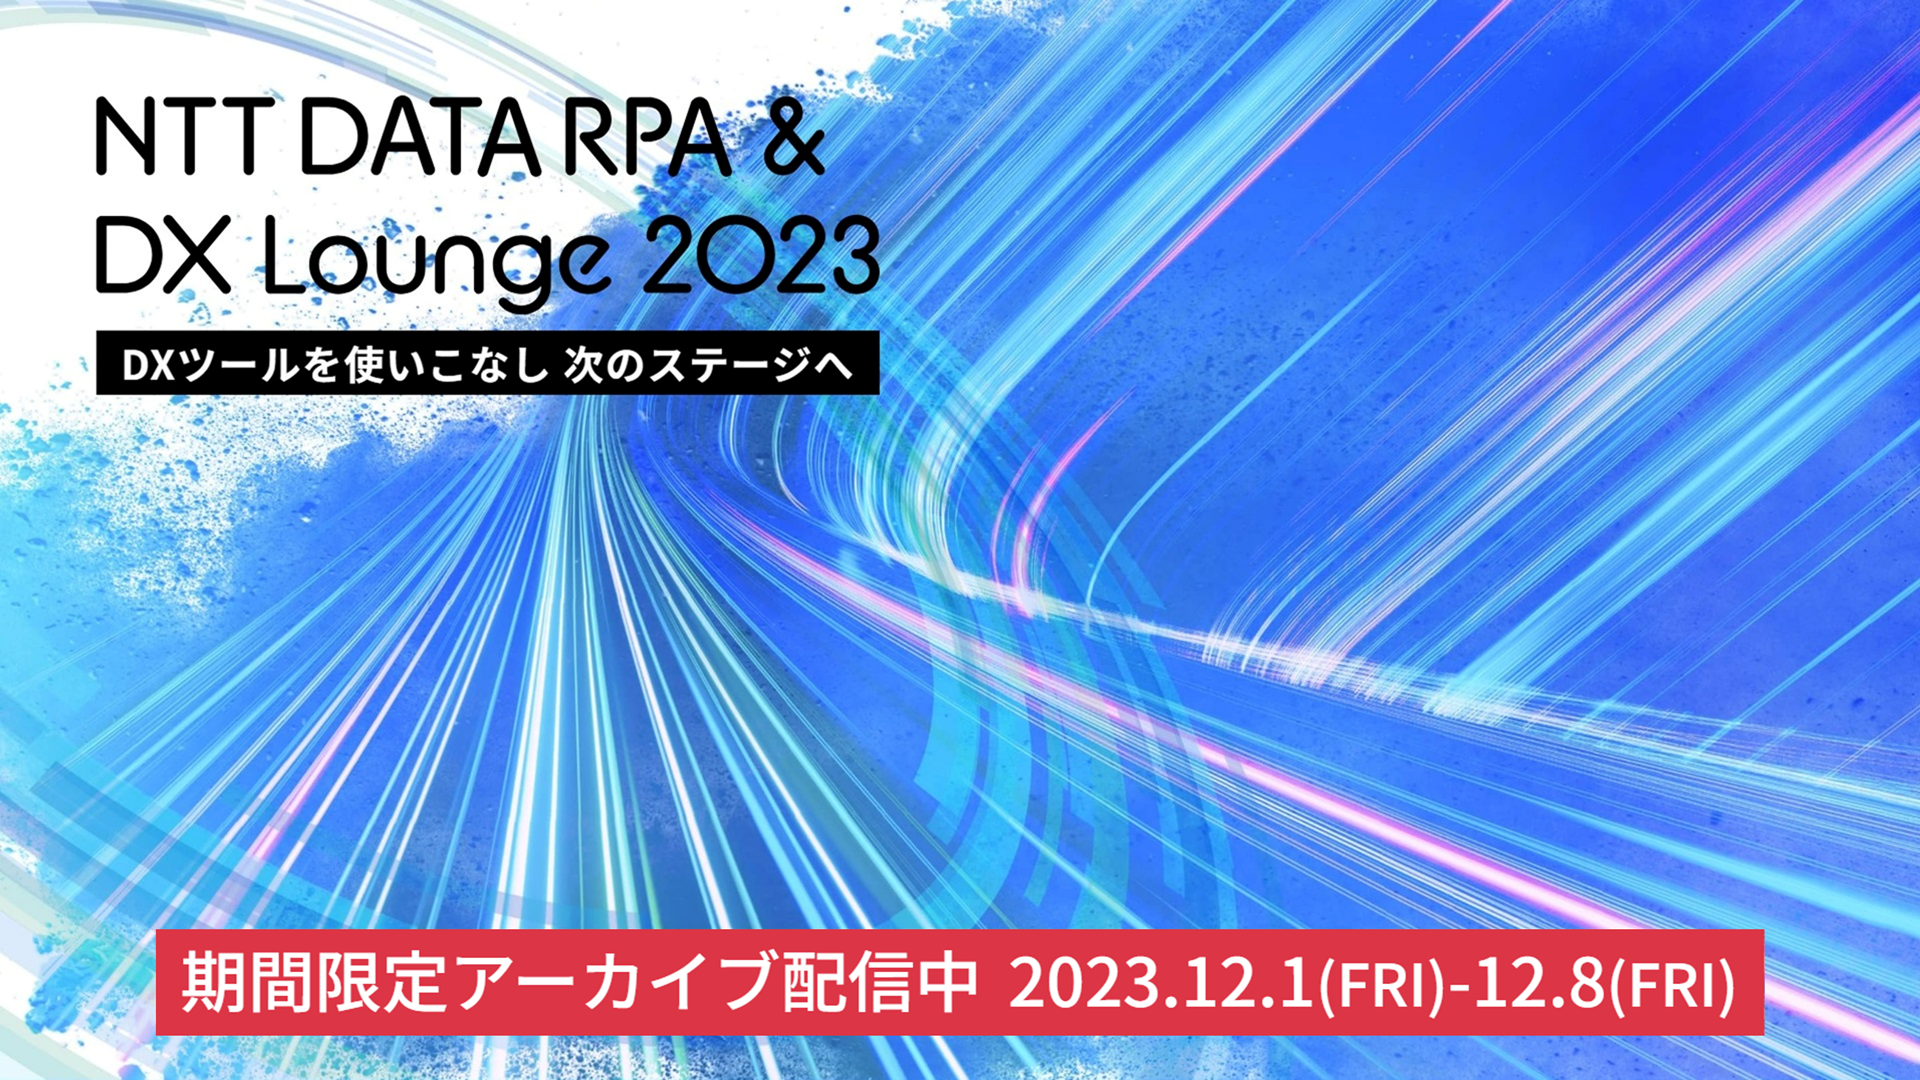 NTTDATA RPA & DX Lounge 2023